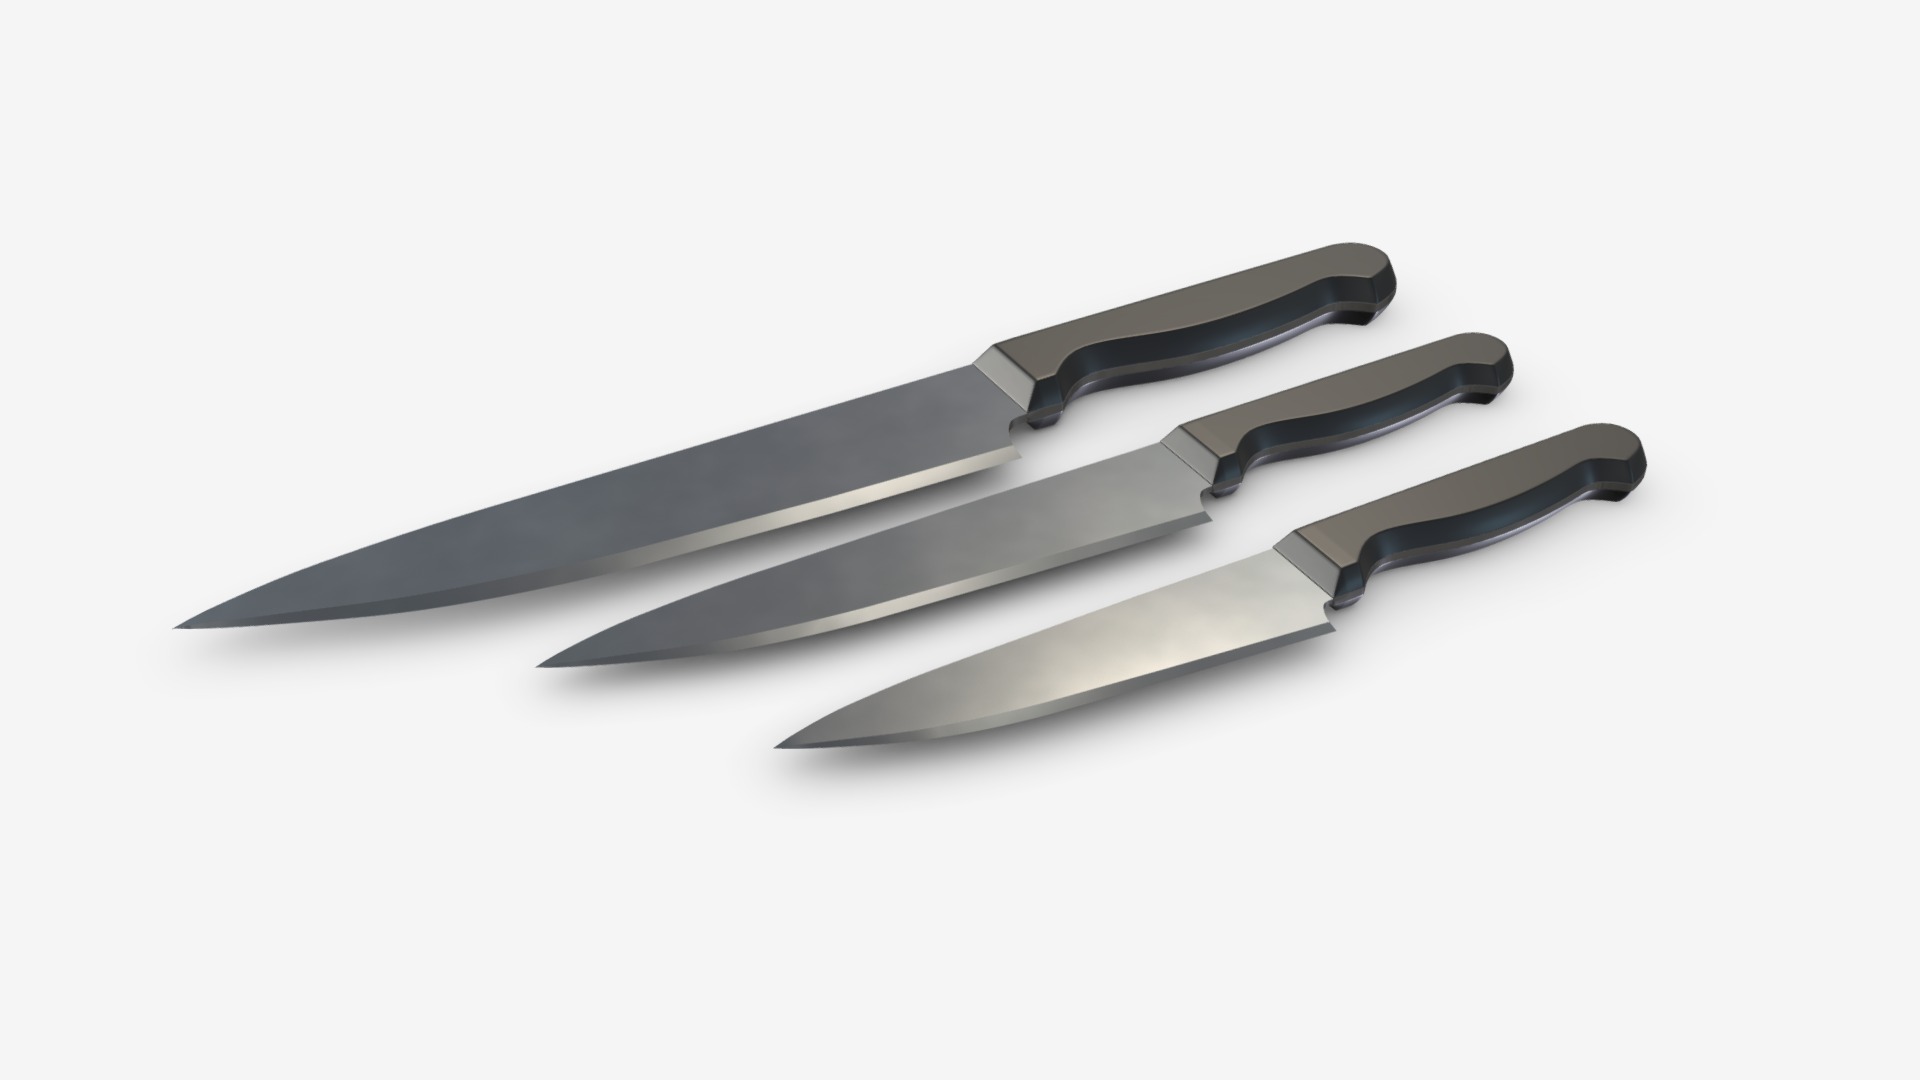 3D model kitchen knife - This is a 3D model of the kitchen knife. The 3D model is about a knife with a black handle.